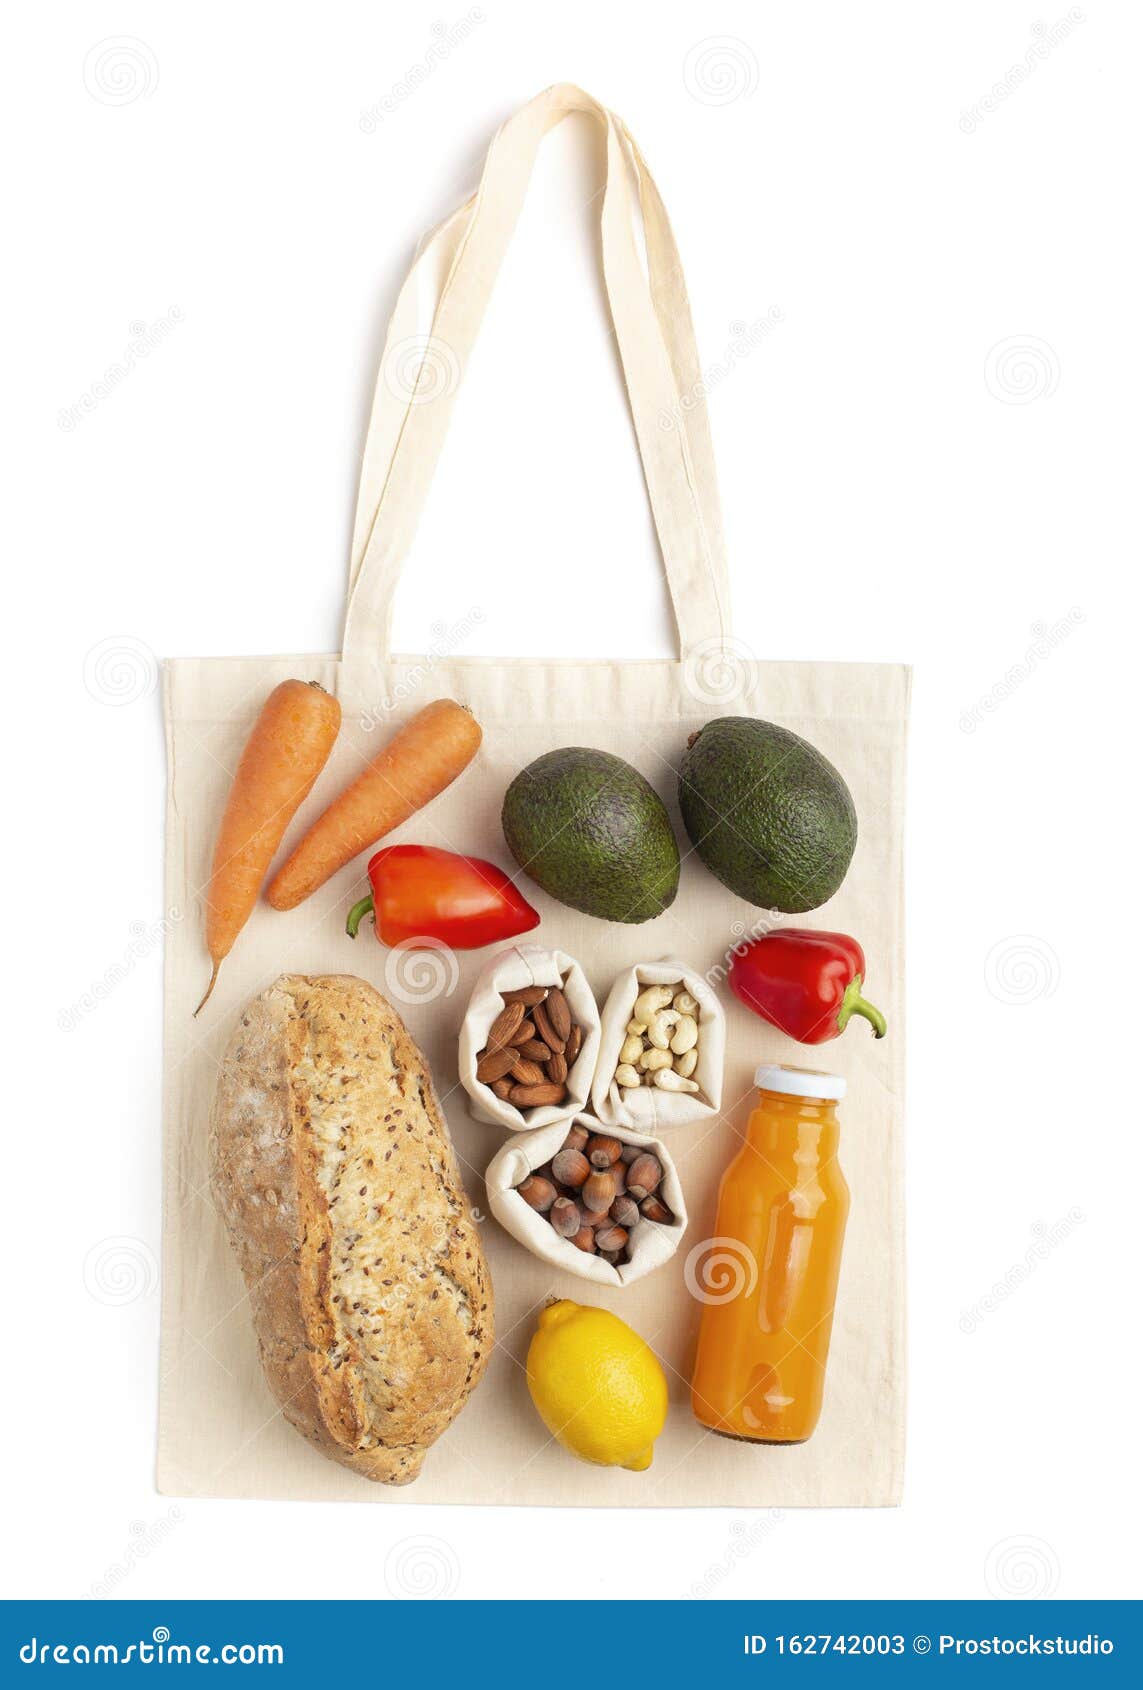 Vegetarian Healthy Products Laying on Eco Friendly Cotton Bag Stock ...